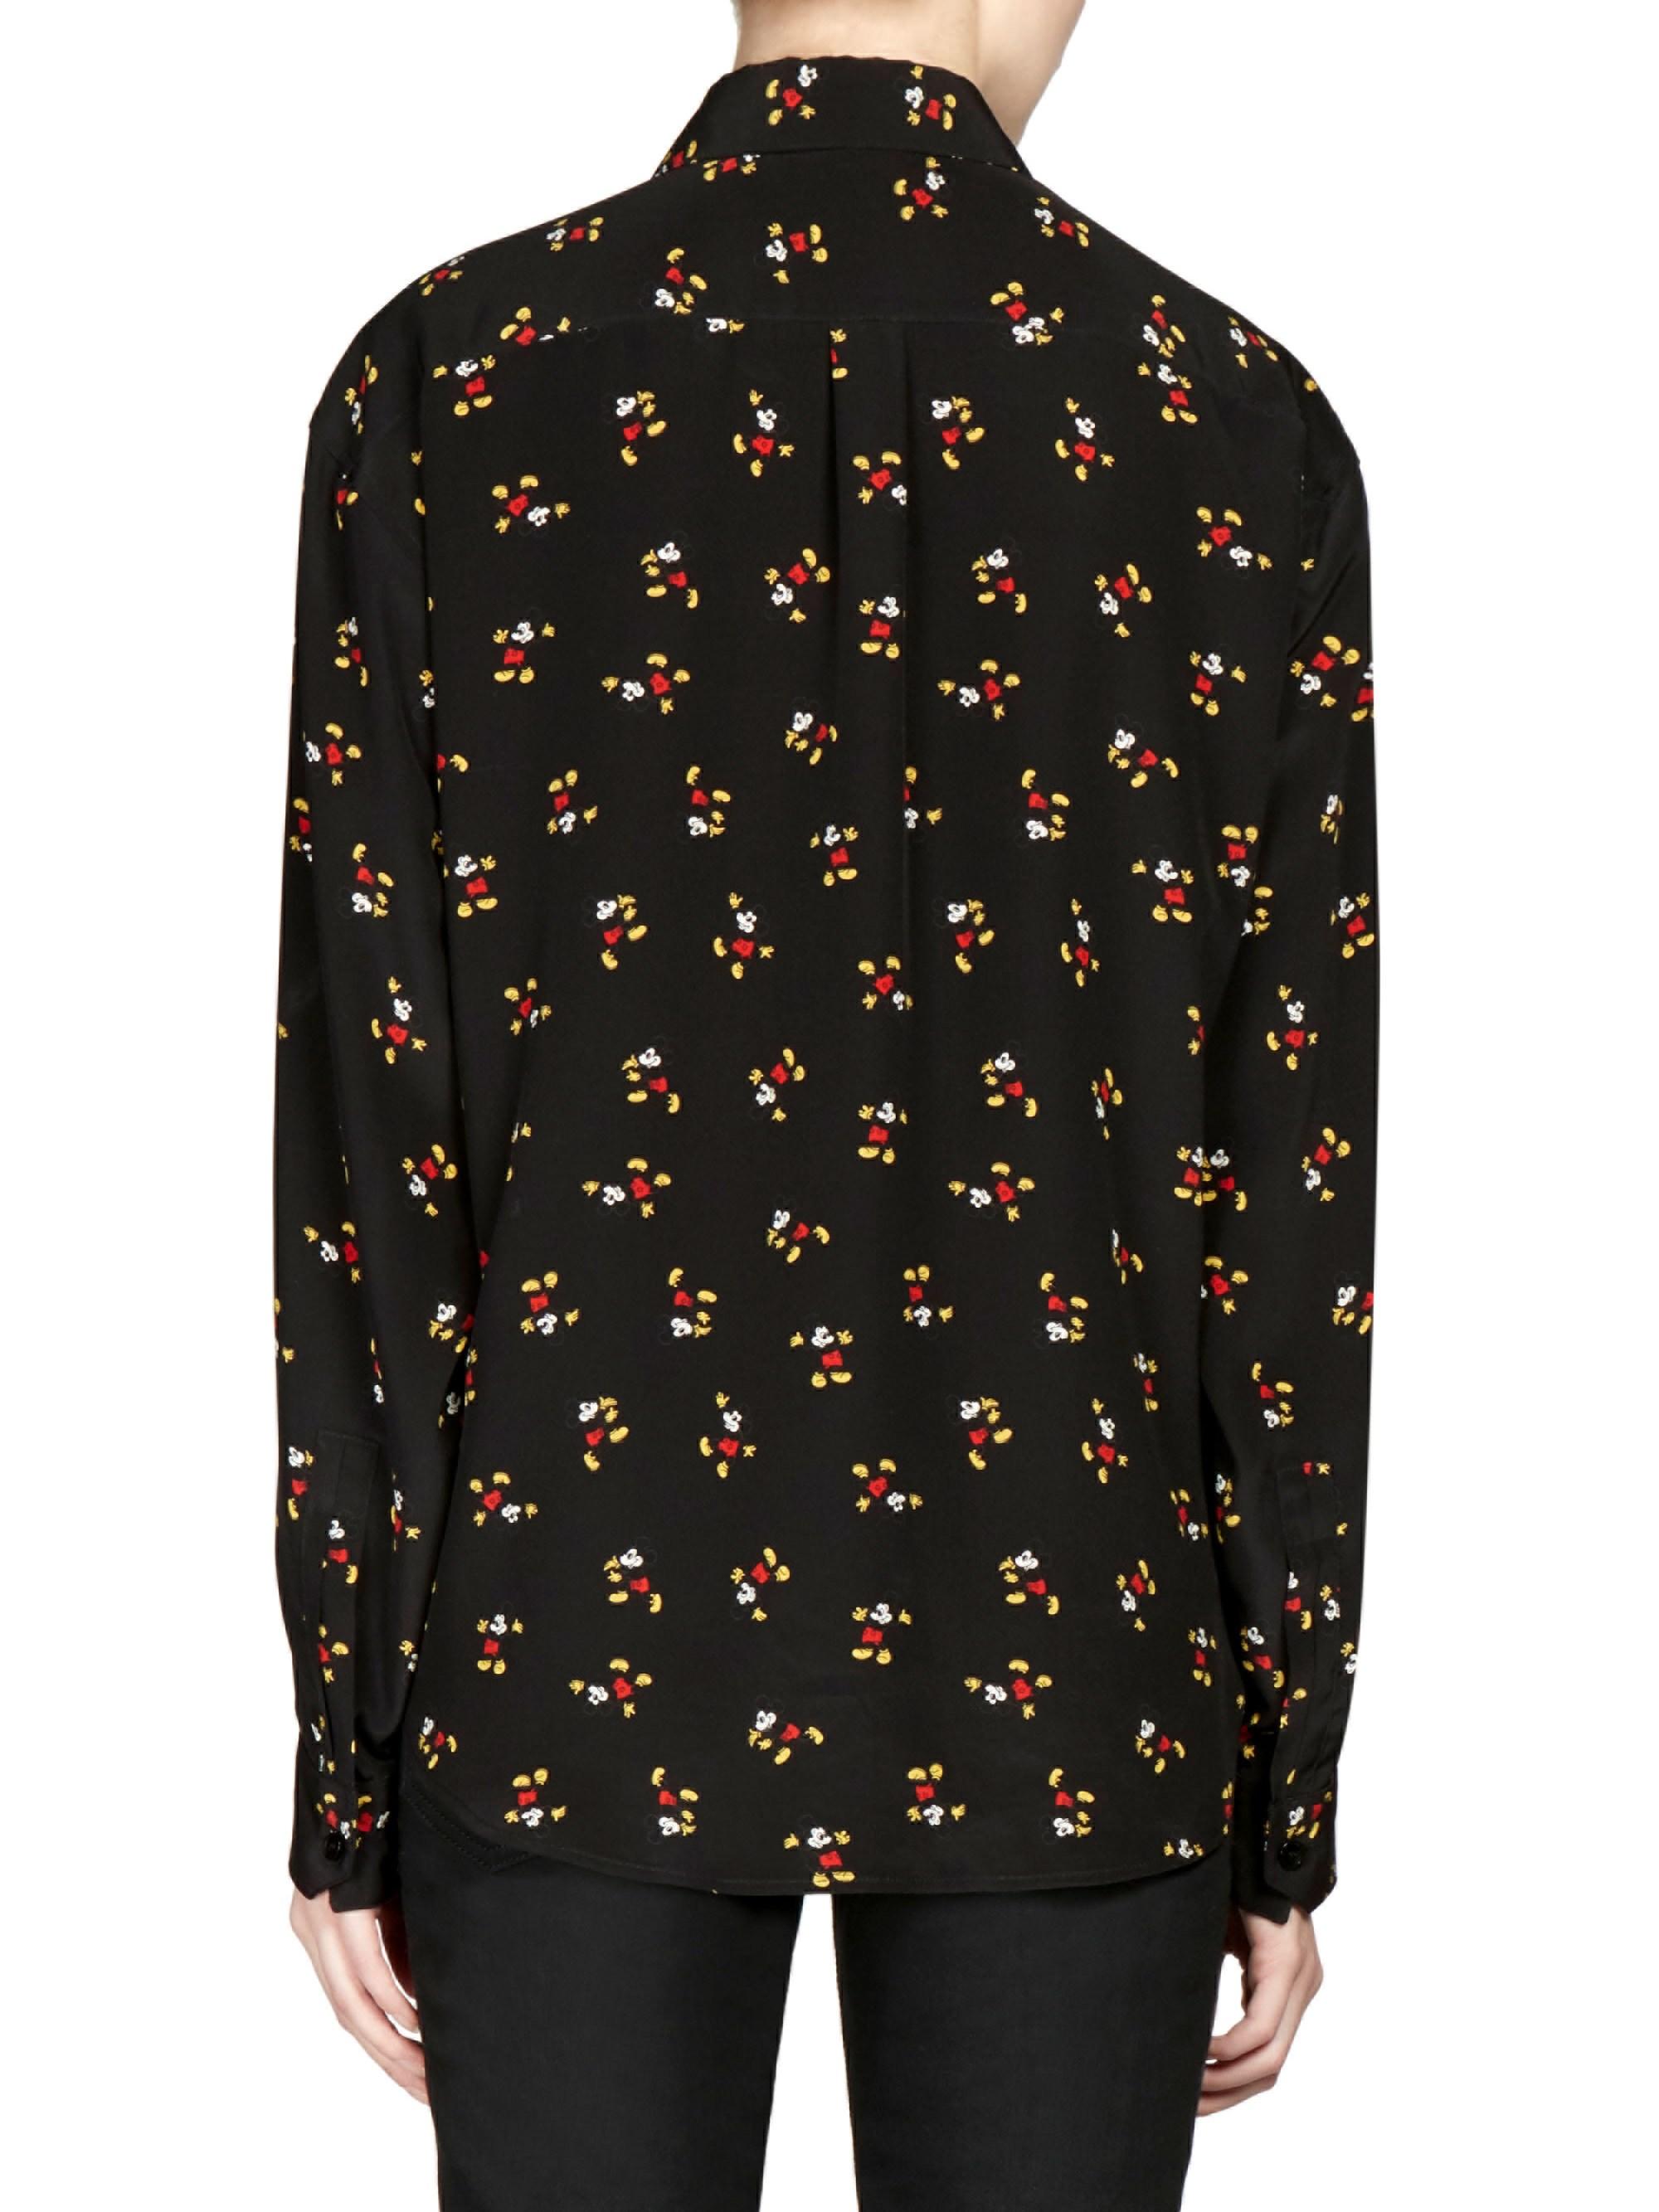 blouse mickey mouse Shop Clothing & Shoes Online